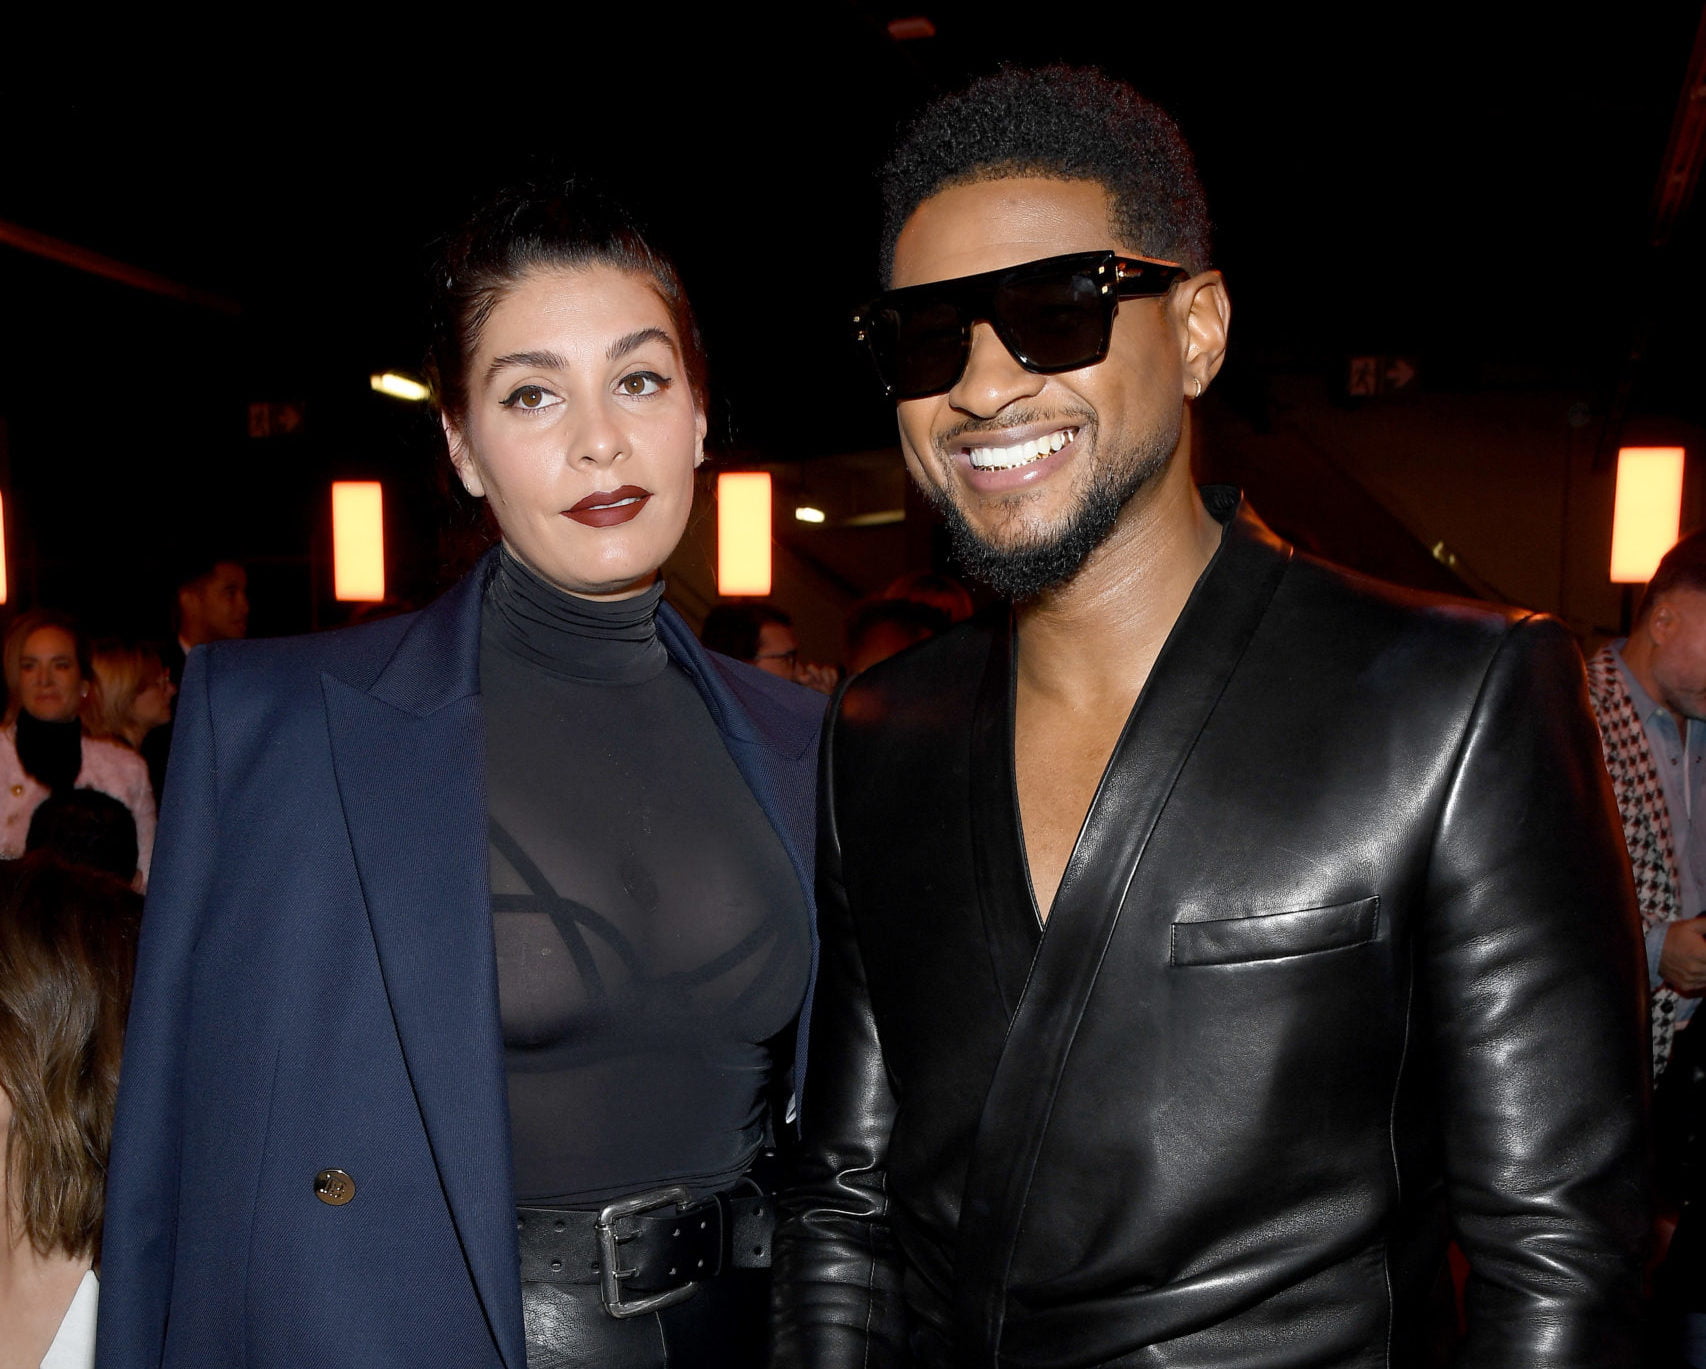 Usher Shares The First Photo Of His Daughter Sovereign, Reveals She Came Sooner Than Expected (Pic Inside)